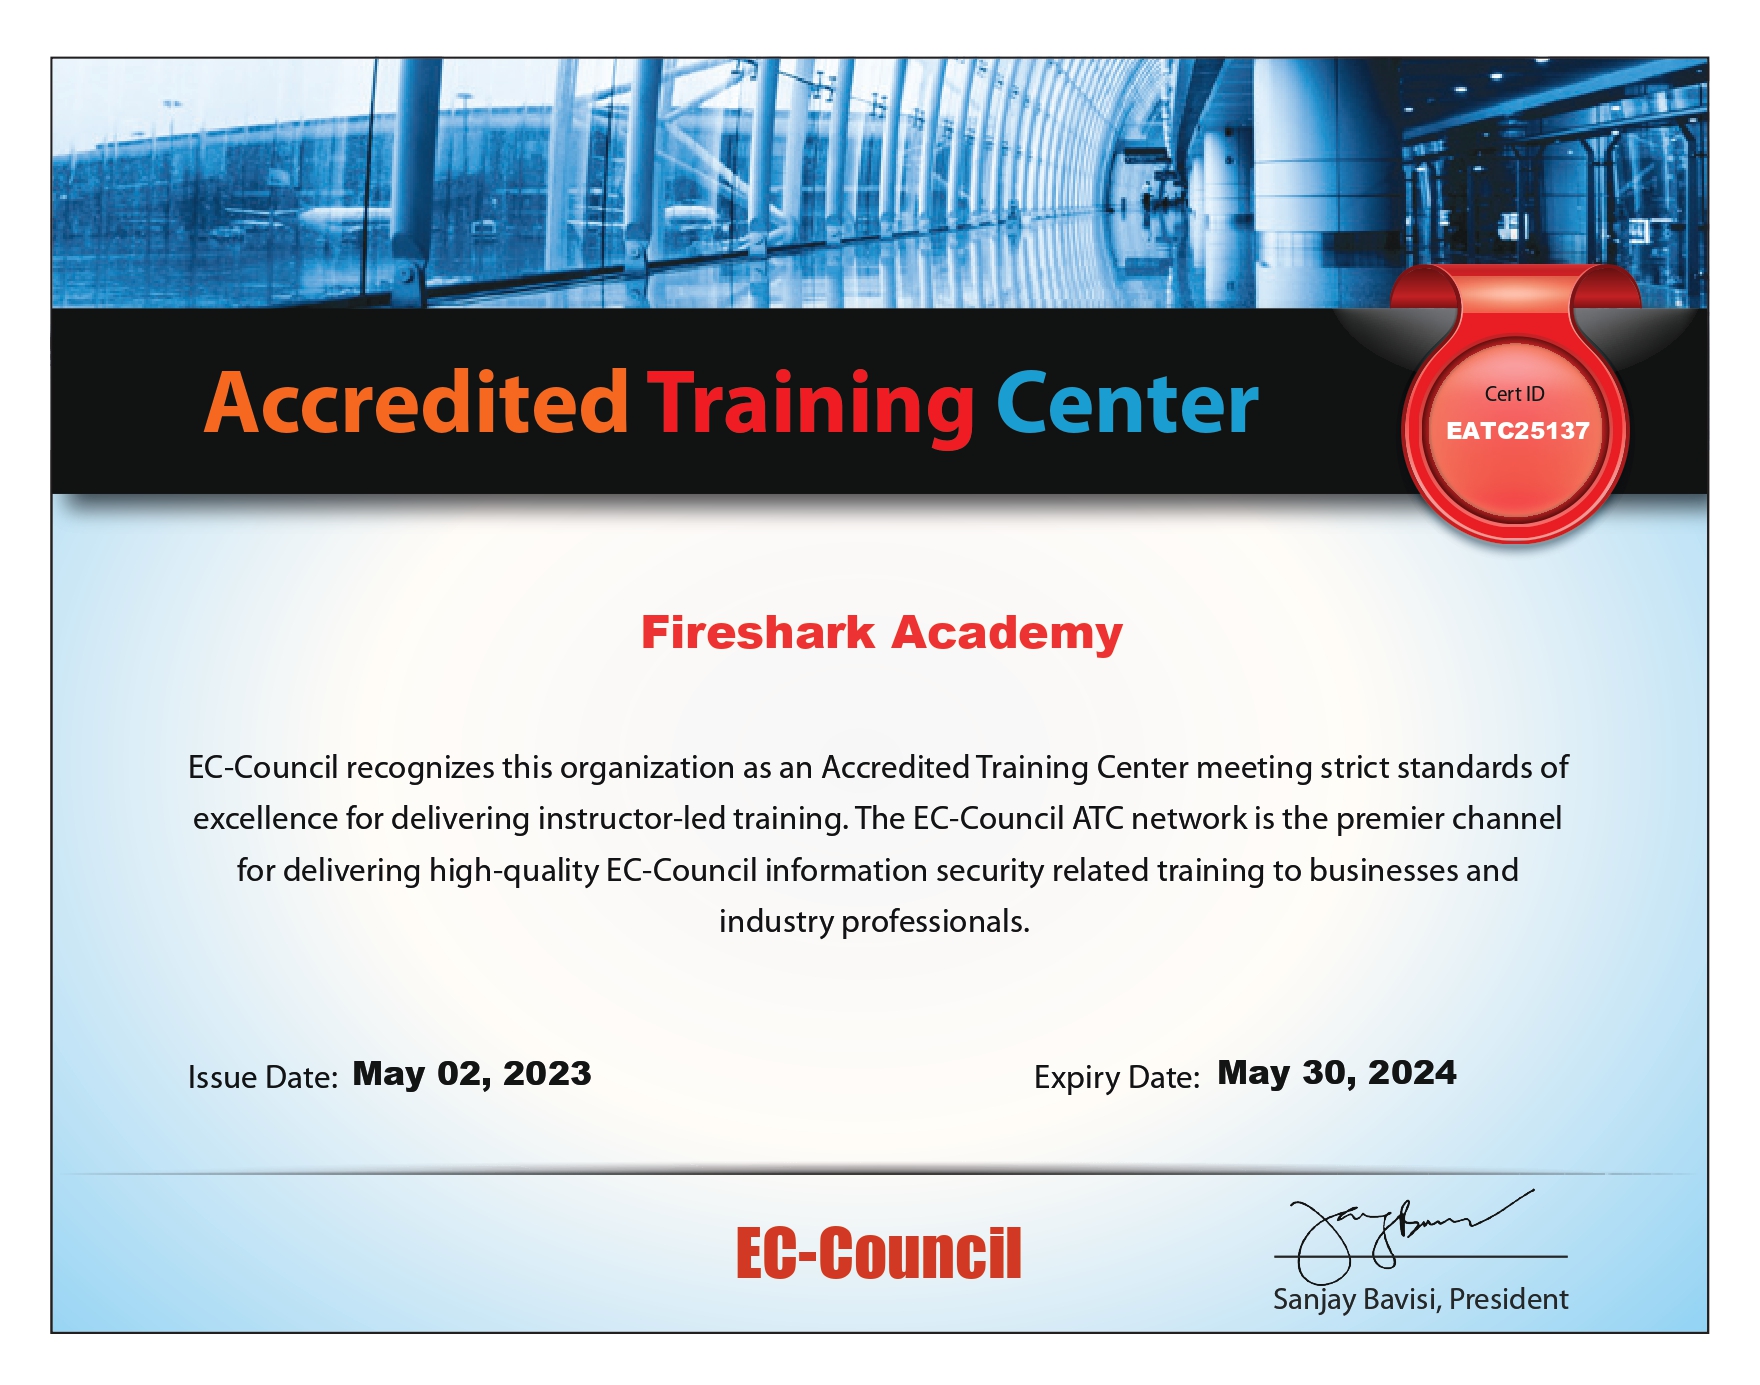 The Ultimate Certification to Protect Against Cyber Threats